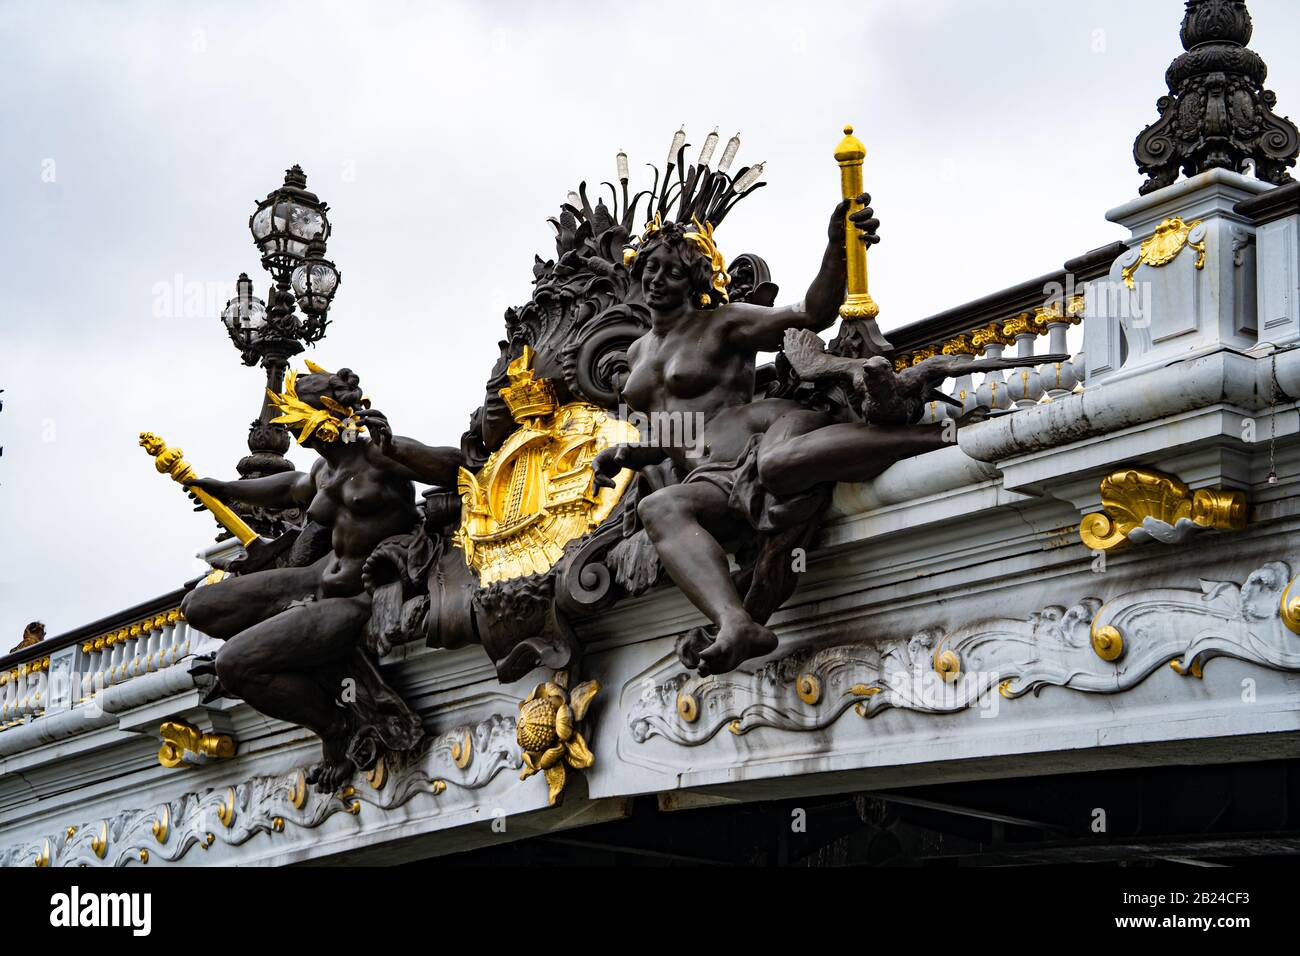 Relief casting Nymphs of the Seine on Pont Alexandre III bridge over the Seine, Paris France Stock Photo